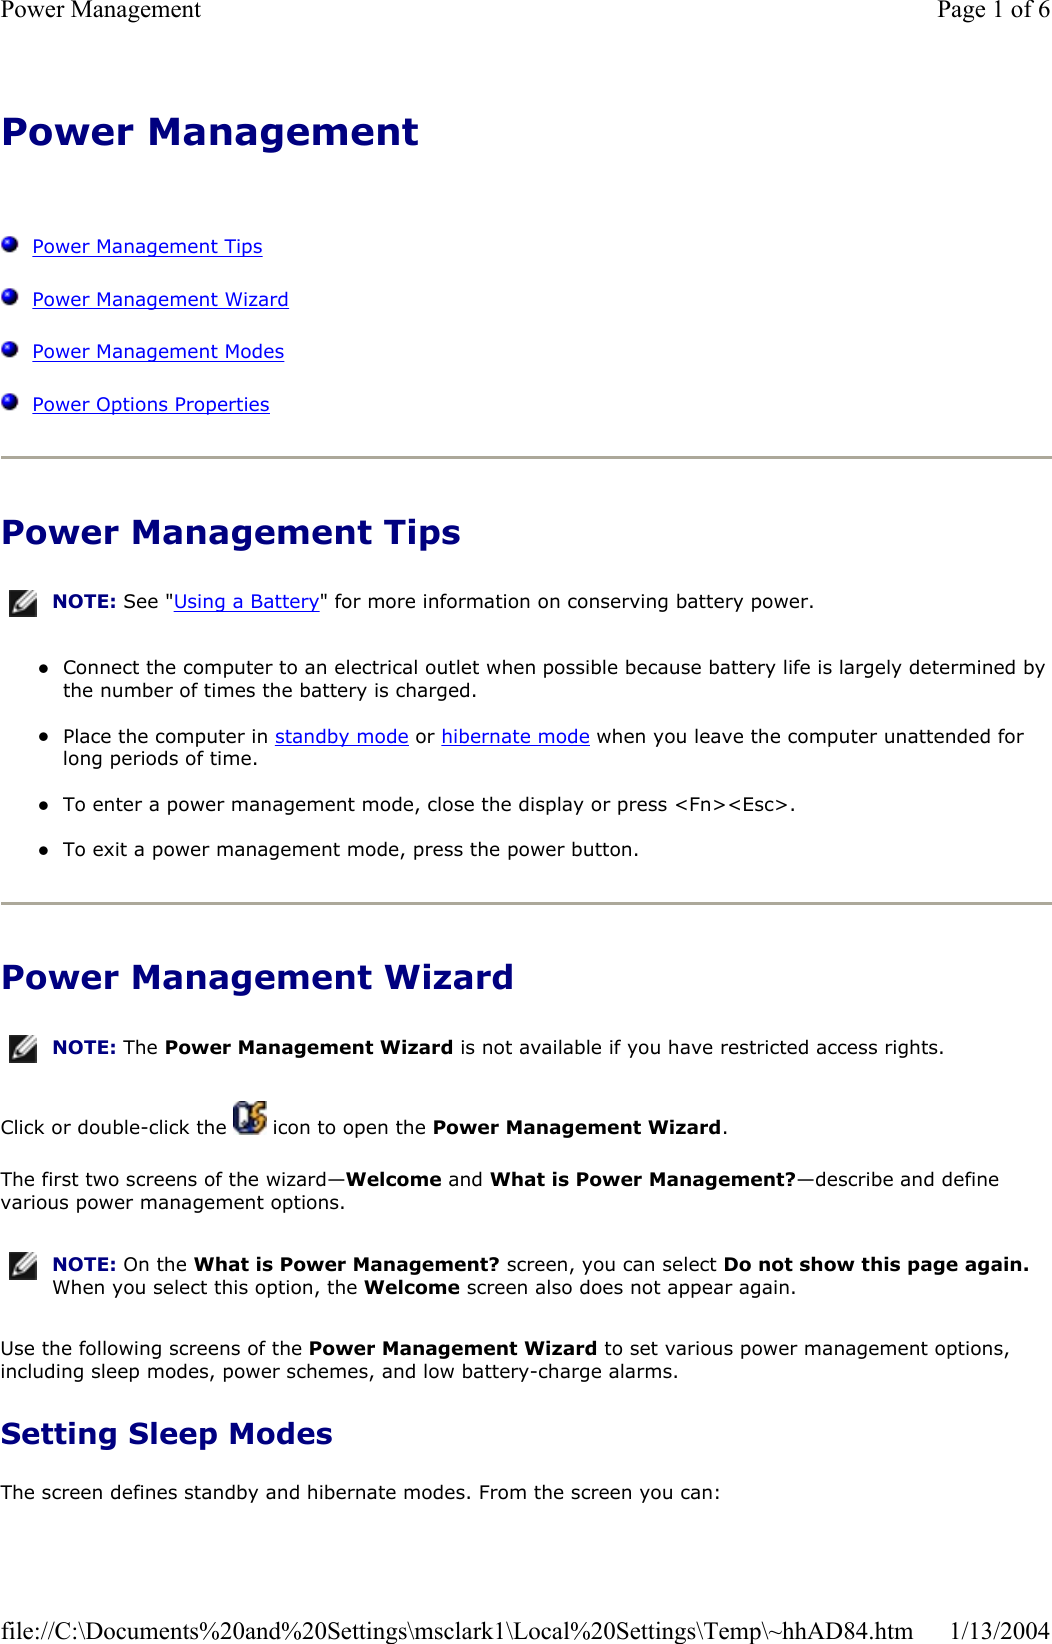 Power Management  Power Management TipsPower Management WizardPower Management ModesPower Options PropertiesPower Management Tips zConnect the computer to an electrical outlet when possible because battery life is largely determined bythe number of times the battery is charged. zPlace the computer in standby mode or hibernate mode when you leave the computer unattended for long periods of time. zTo enter a power management mode, close the display or press &lt;Fn&gt;&lt;Esc&gt;. zTo exit a power management mode, press the power button. Power Management Wizard Click or double-click the   icon to open the Power Management Wizard.The first two screens of the wizard—Welcome and What is Power Management?—describe and define various power management options. Use the following screens of the Power Management Wizard to set various power management options, including sleep modes, power schemes, and low battery-charge alarms. Setting Sleep Modes The screen defines standby and hibernate modes. From the screen you can: NOTE: See &quot;Using a Battery&quot; for more information on conserving battery power.NOTE: The Power Management Wizard is not available if you have restricted access rights.NOTE: On the What is Power Management? screen, you can select Do not show this page again.When you select this option, the Welcome screen also does not appear again.Page 1 of 6Power Management1/13/2004file://C:\Documents%20and%20Settings\msclark1\Local%20Settings\Temp\~hhAD84.htm